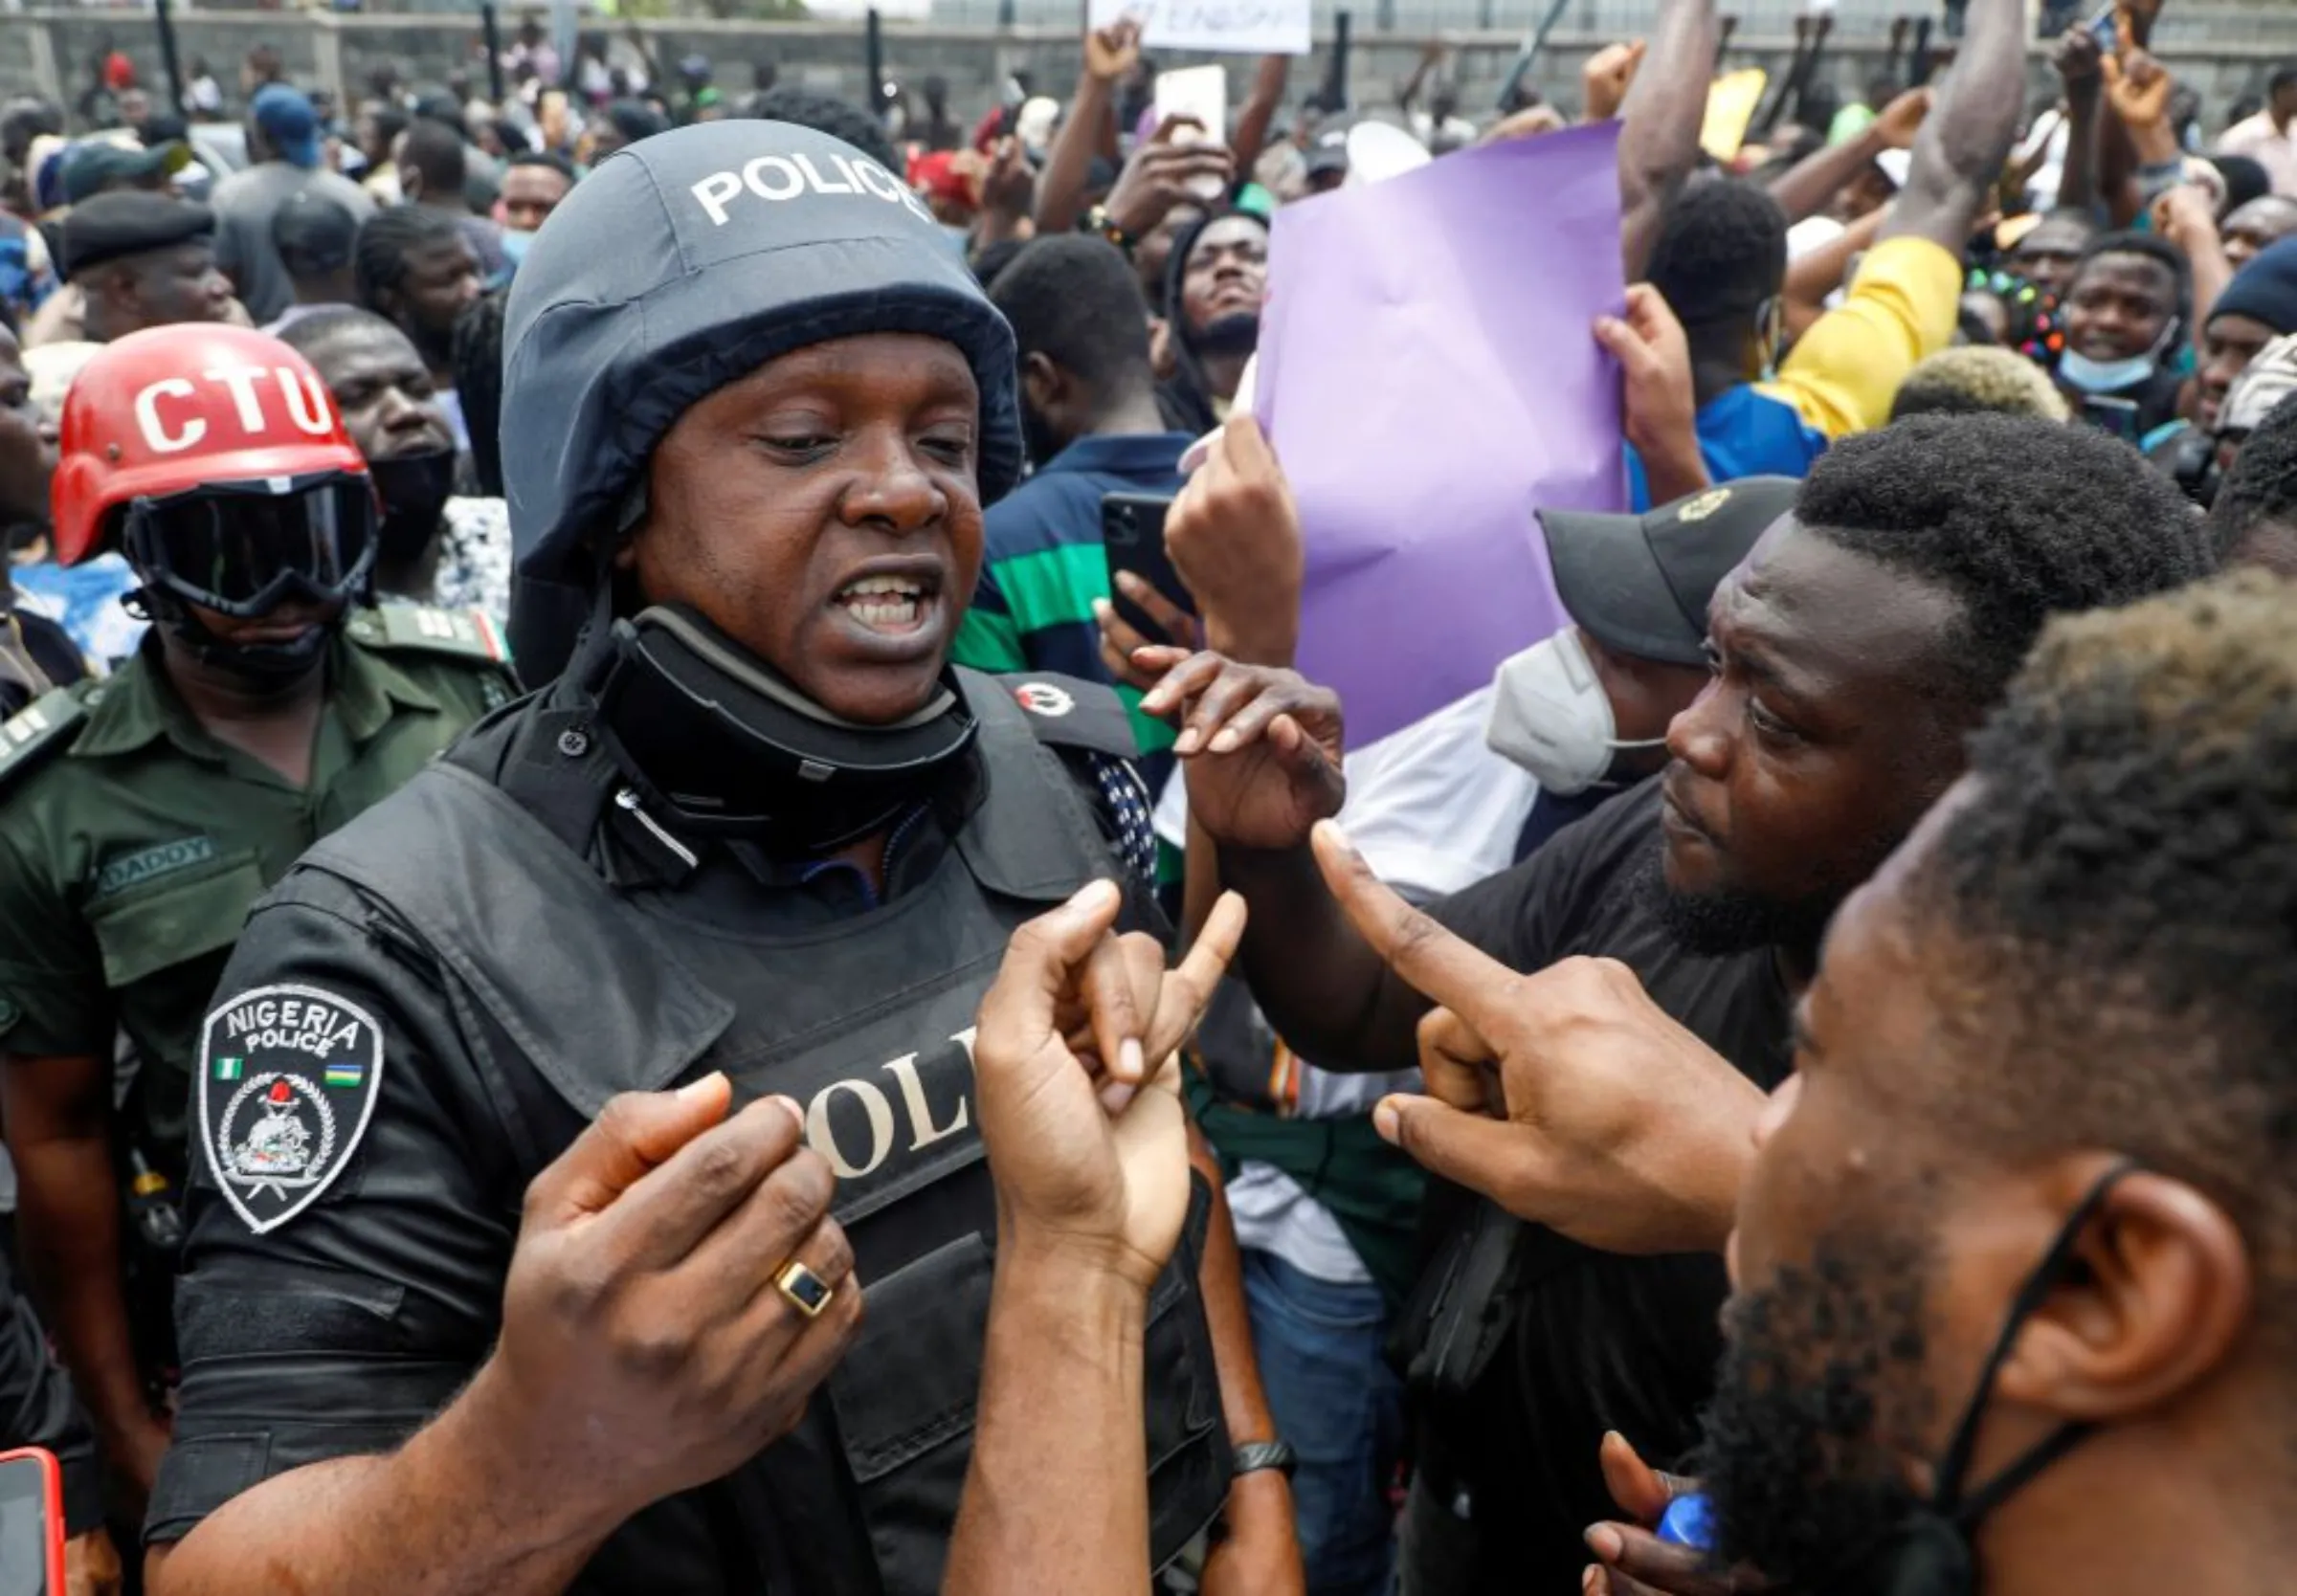 Demonstrators talk to a police officer during a protest over alleged police brutality, in Lagos, Nigeria October 12, 2020. REUTERS/Temilade Adelaja